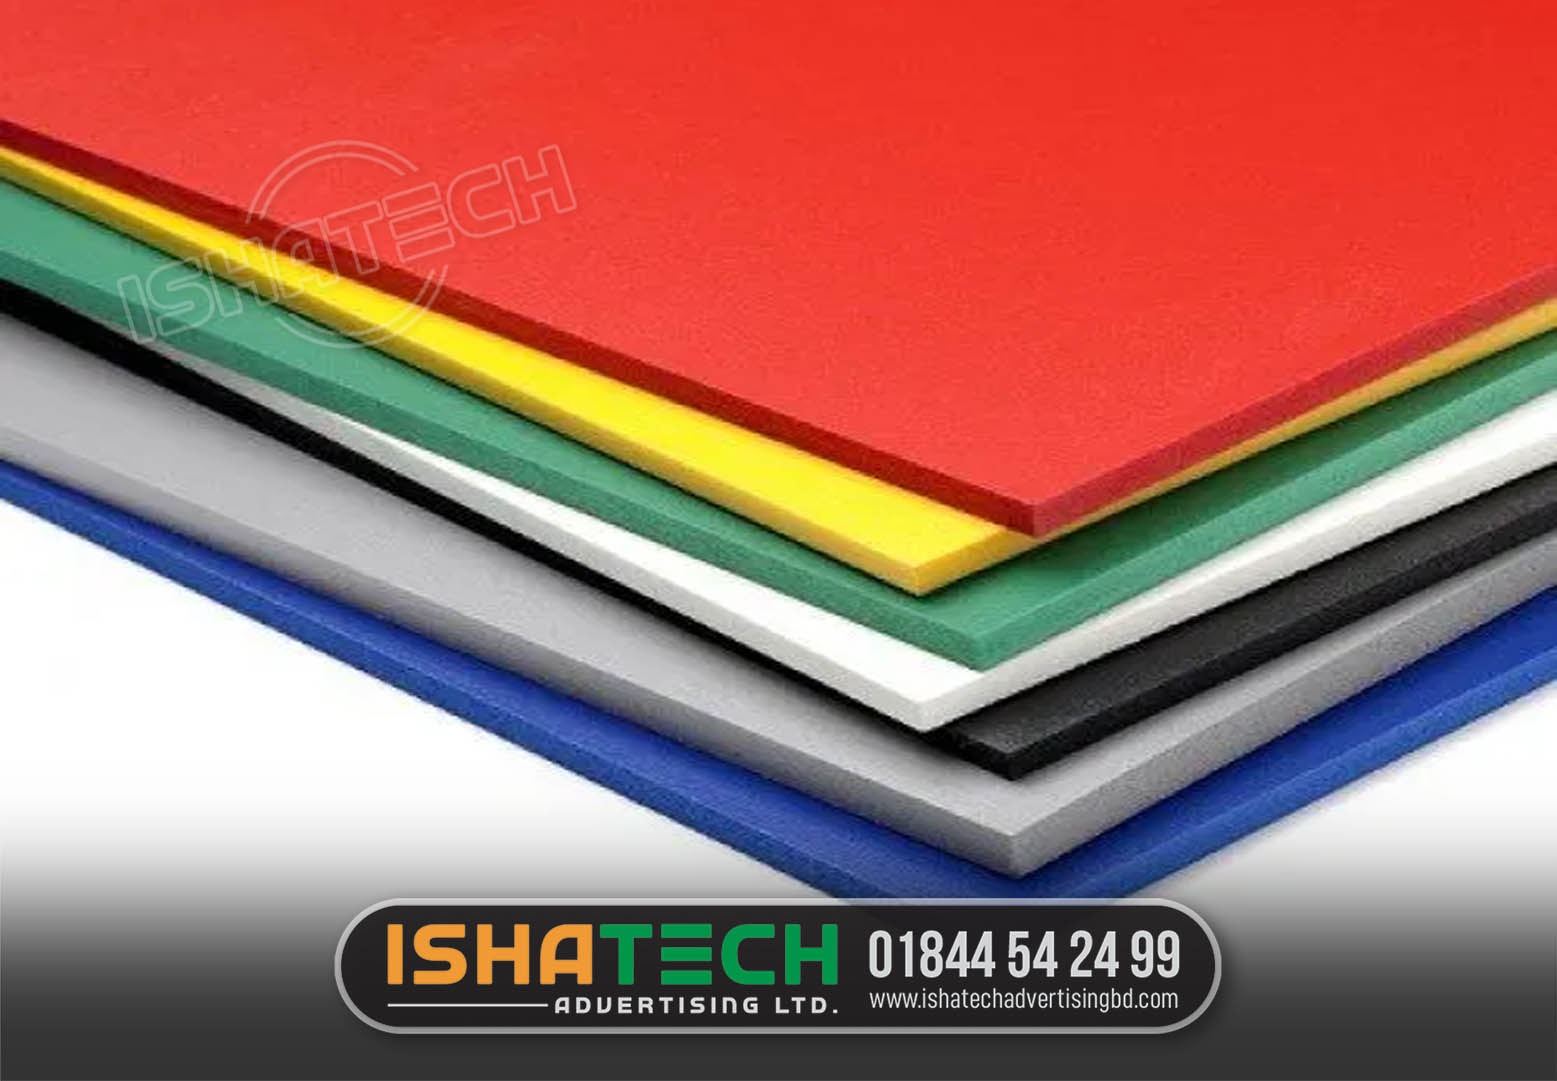 2mm pvc sheet price in Bangladesh, PVC Sheet Price in Bangladesh. 4×8 pvc sheet price in Bangladesh. 4mm pvc sheet price in Bangladesh. 12mm pvc sheet price in Bangladesh. Rfl pvc sheet price in Bangladesh. 2mm pvc sheet price in Bangladesh. upvc sheet price in Bangladesh. 18mm pvc board price in Bangladesh. Find the PVC Sheet Price in Bangladesh. RFL is the Largest Manufacturer of UPVC sheets in BD. Visit us to find the glossy, laser cutting, colored, soft, white & PVC sheet at cheap prices. 3mm PVC Board White for Craft and DIY Project 3 pcs. 3mm PVC Board 5pcs White/blue/yellow for Craft. 5mm PVC Board 5pcs White for Craft and DIY Project. PVC Board 8mm white colour for DIY project model.